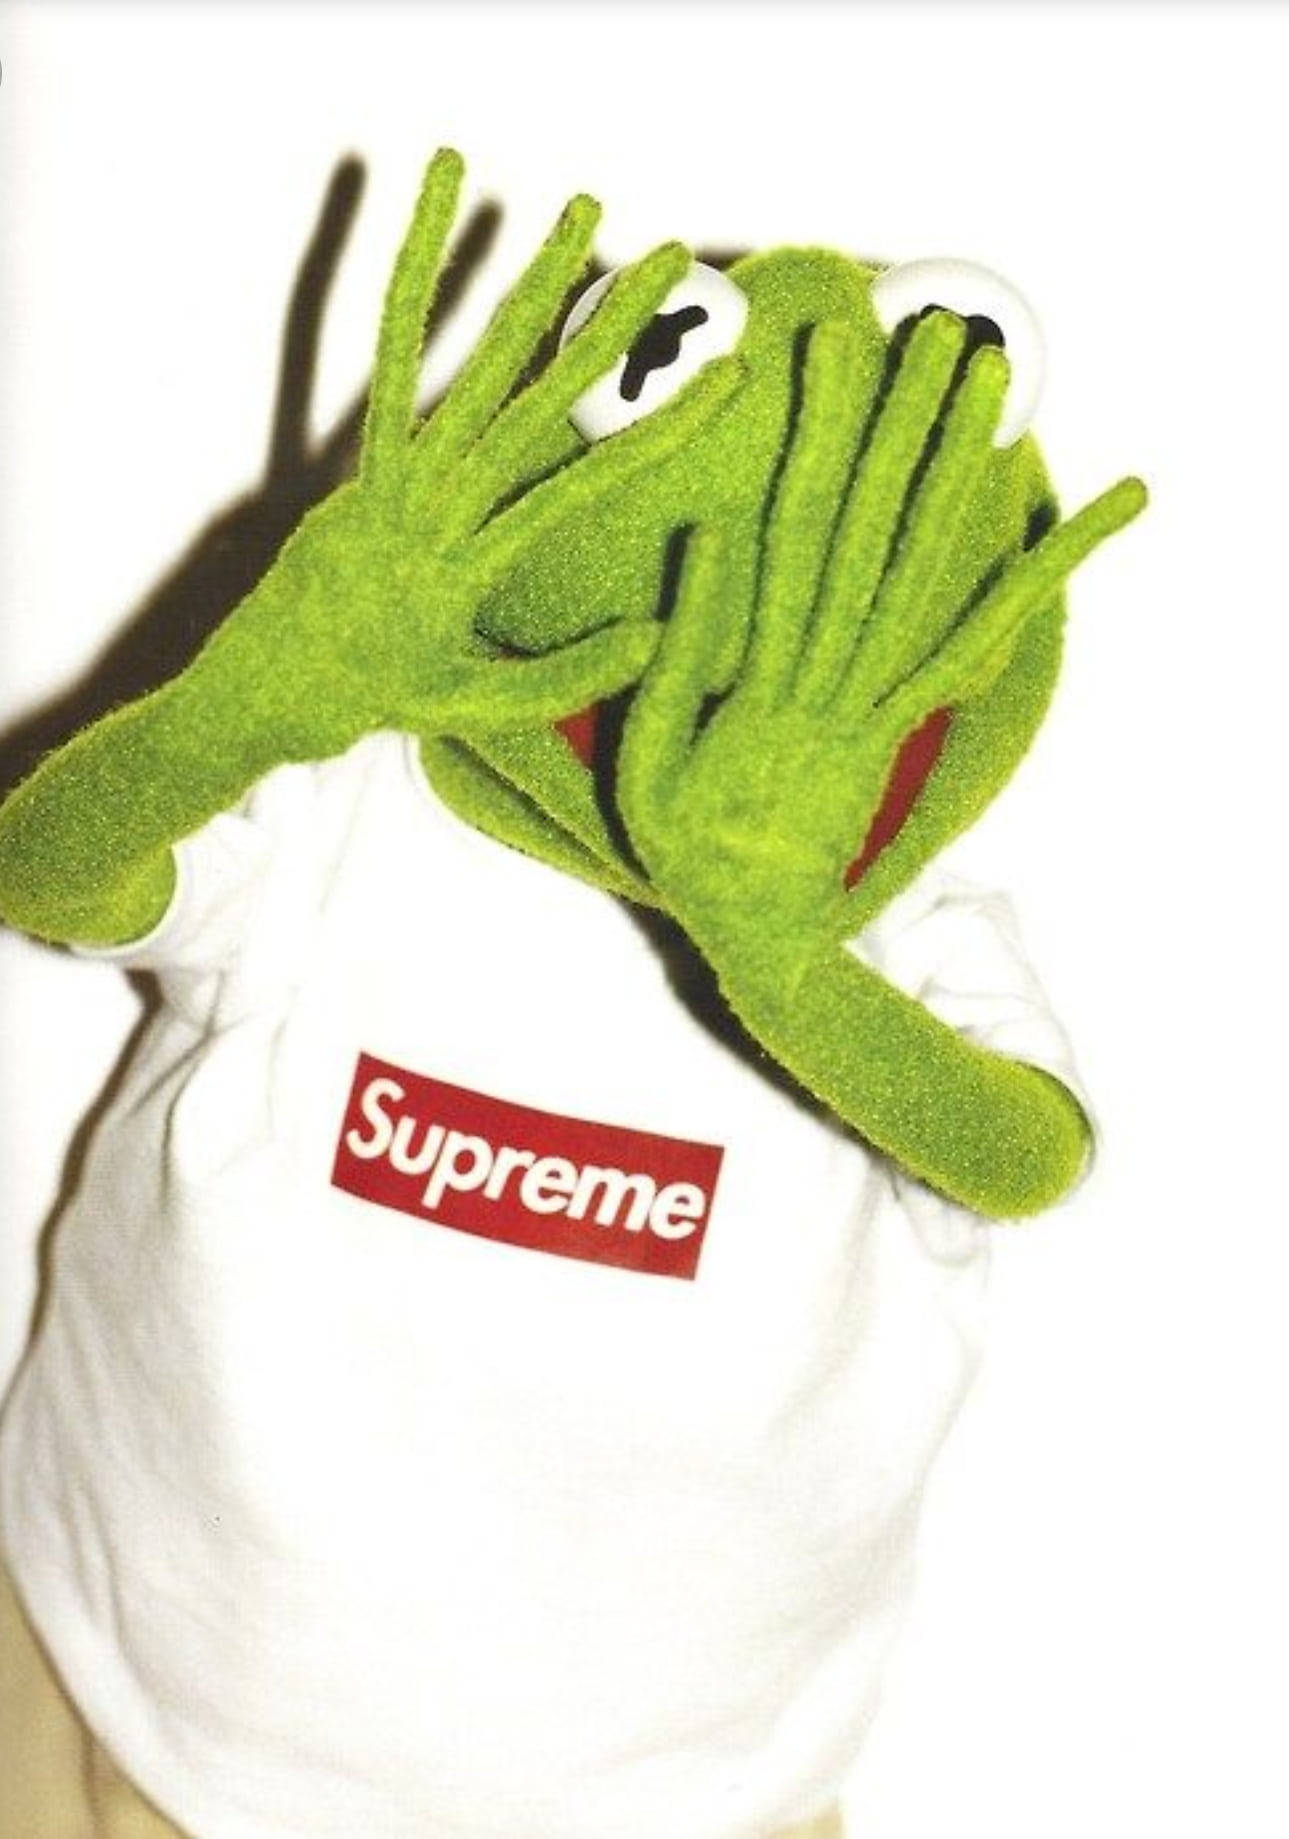 Kermit The Frog The Muppets Supreme Shirt Background